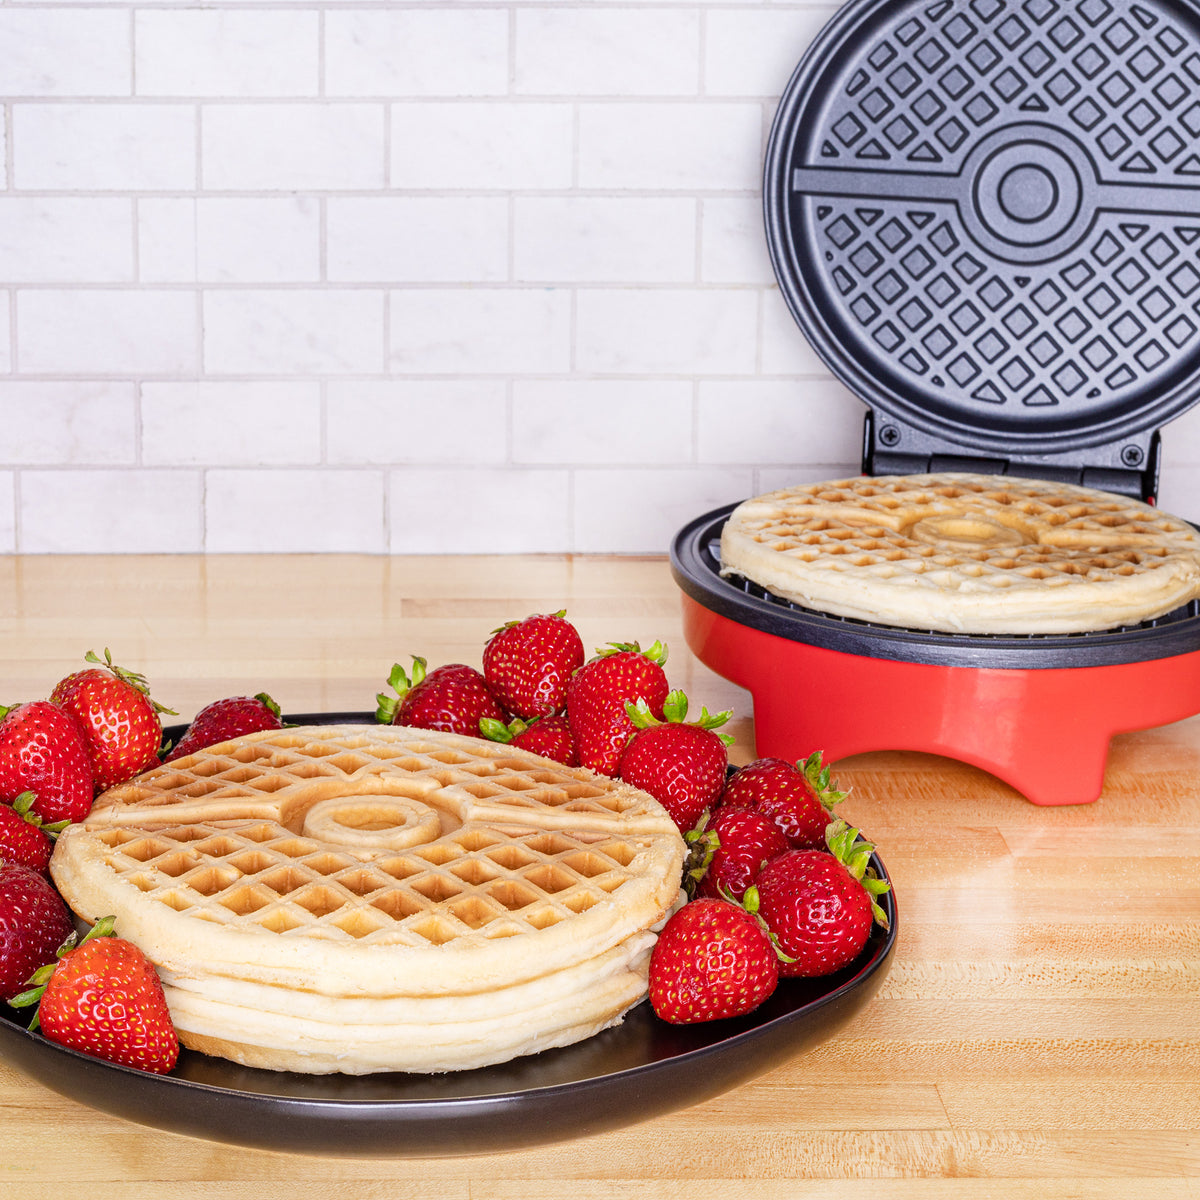 The Waffle Maker Center